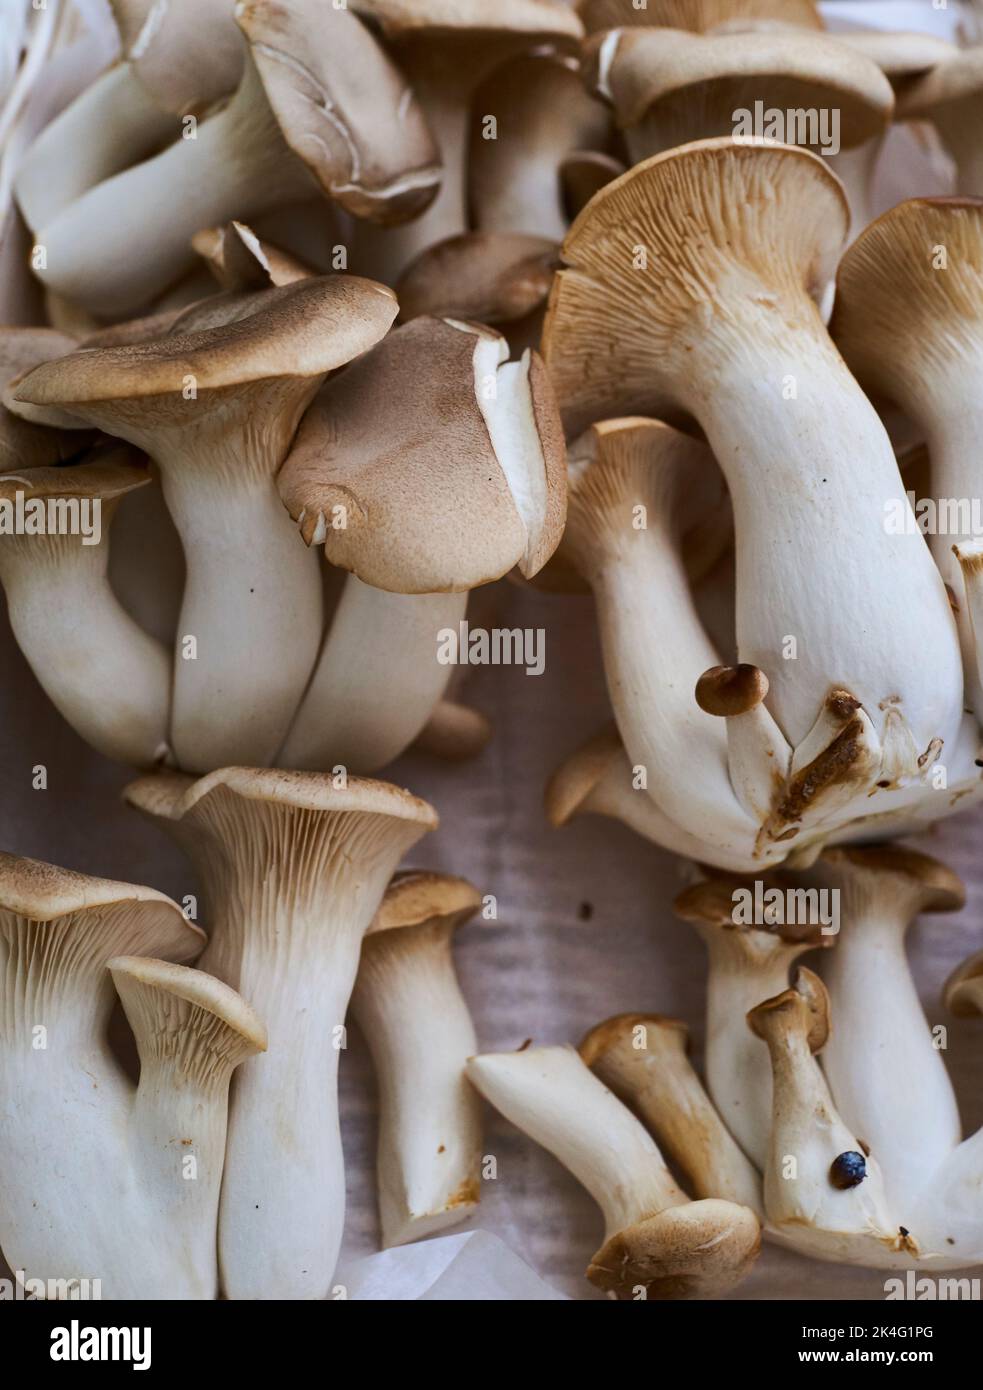 King Oyster mushrooms are meaty mushrooms that stand up to stir-frying.  They have a savory or umami quality.  A natural substitute for meats. Organic Stock Photo